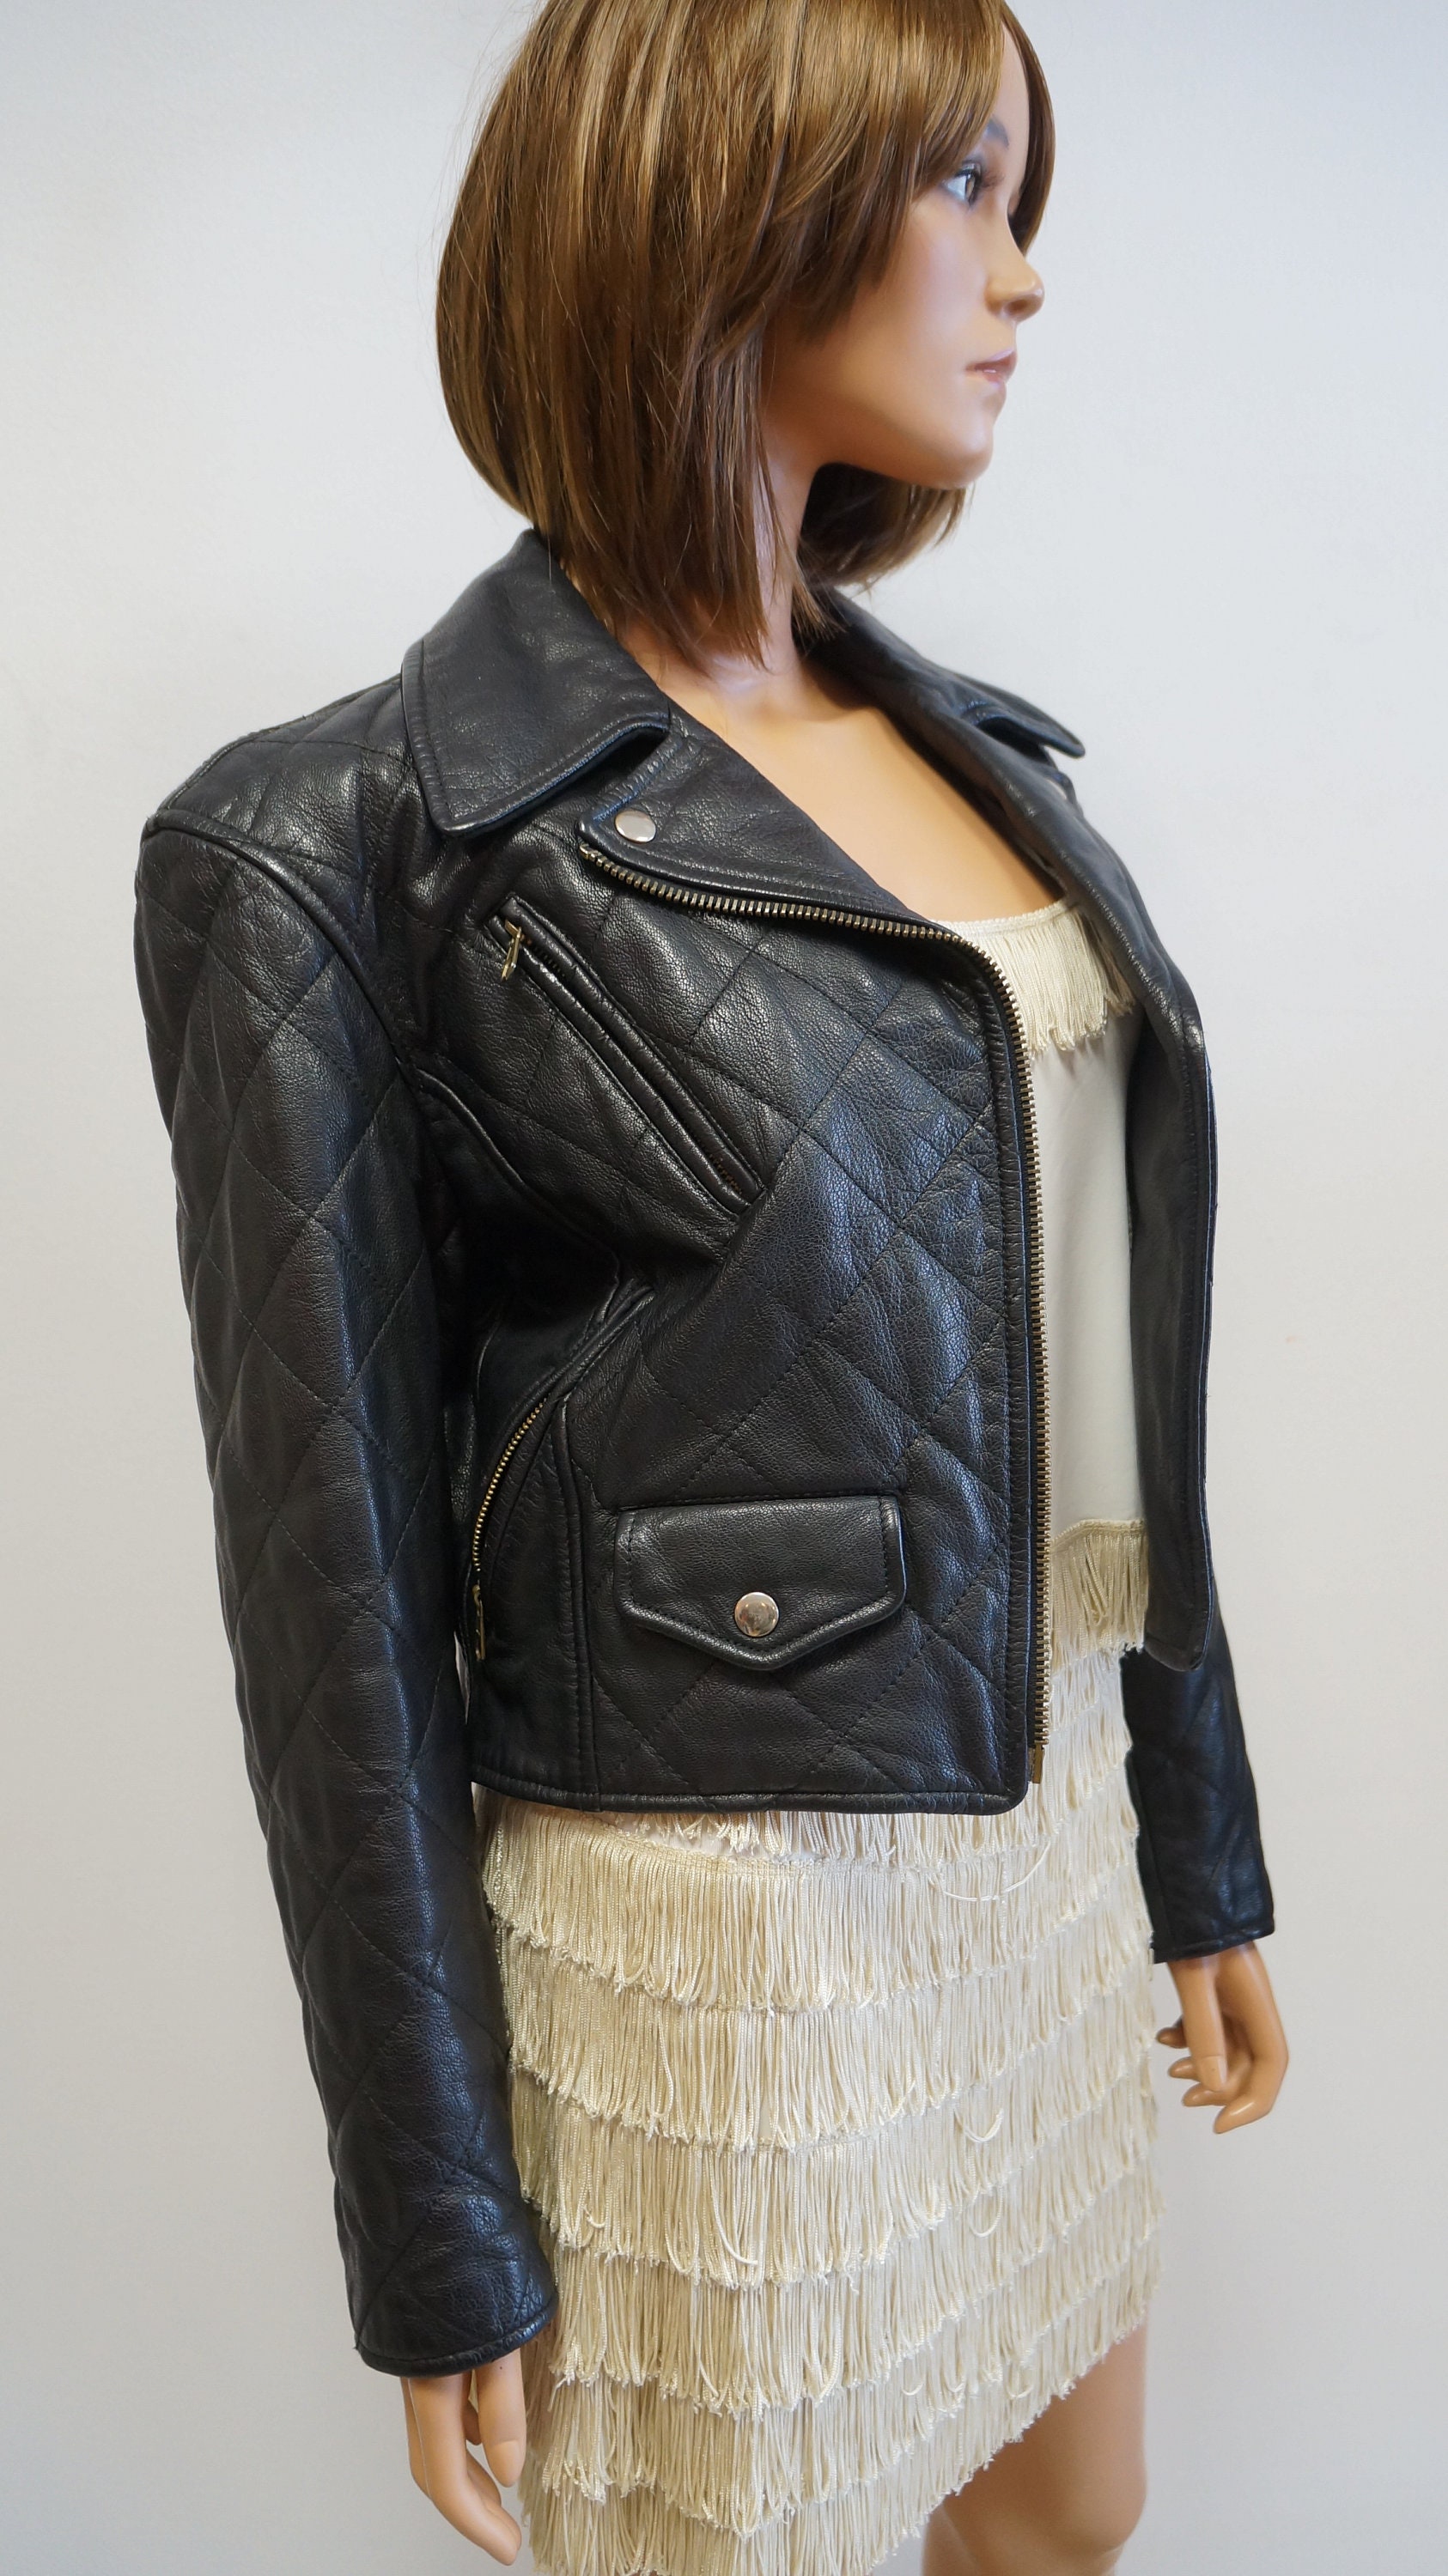 Moschino Leather Jacket Moschino Cheap Chic Quilted Leather 